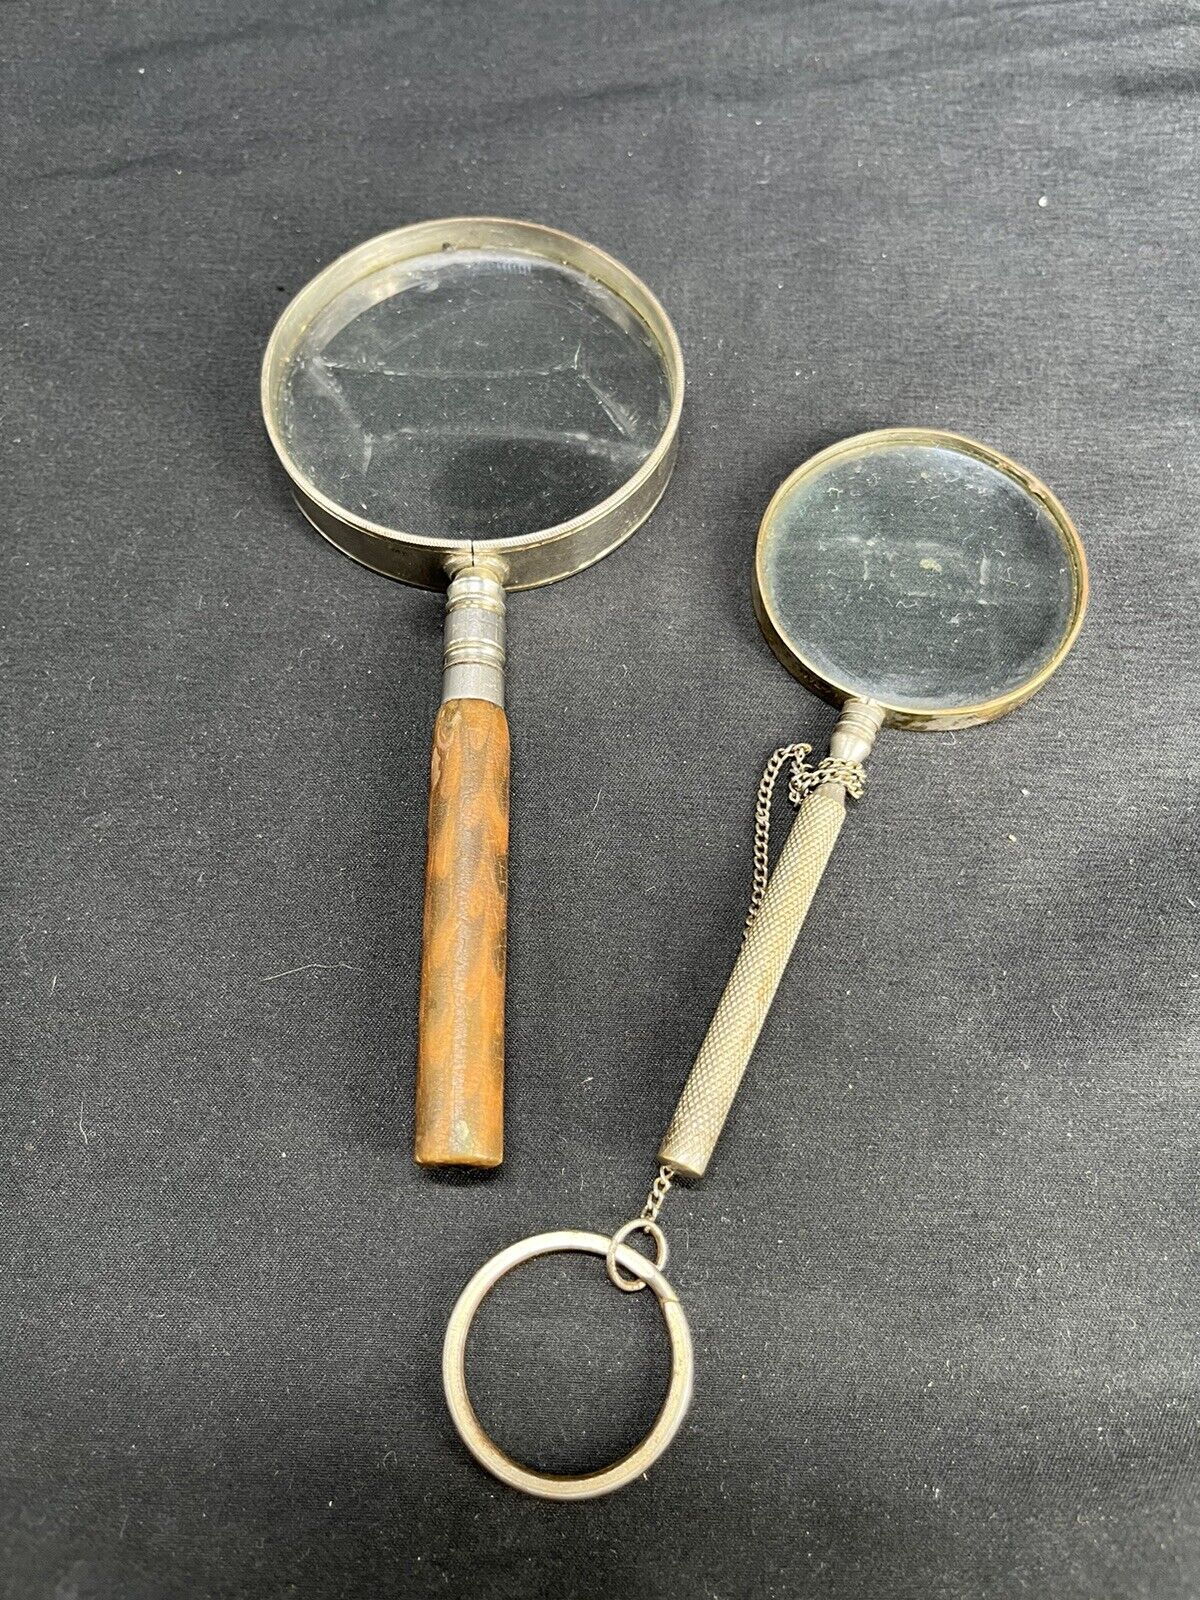 2 Vintage Large Round Magnifying Glass Wooden Handle - Made in Japan